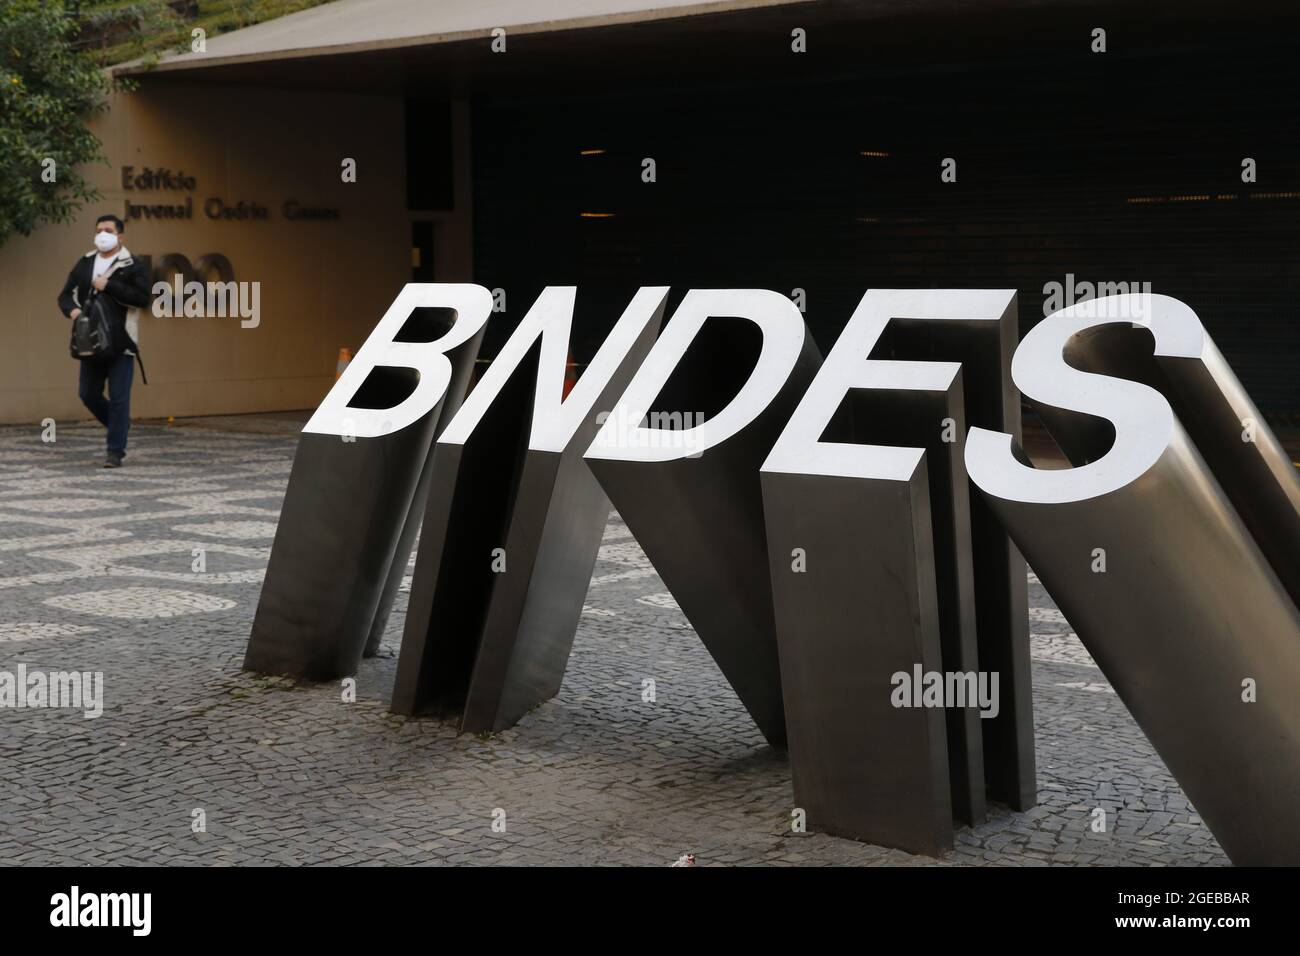 BNDES bank logo on building headquarters. Brazilian national state owned bank for social and economic development - Rio de Janeiro, Brazil 06.25.2021 Stock Photo